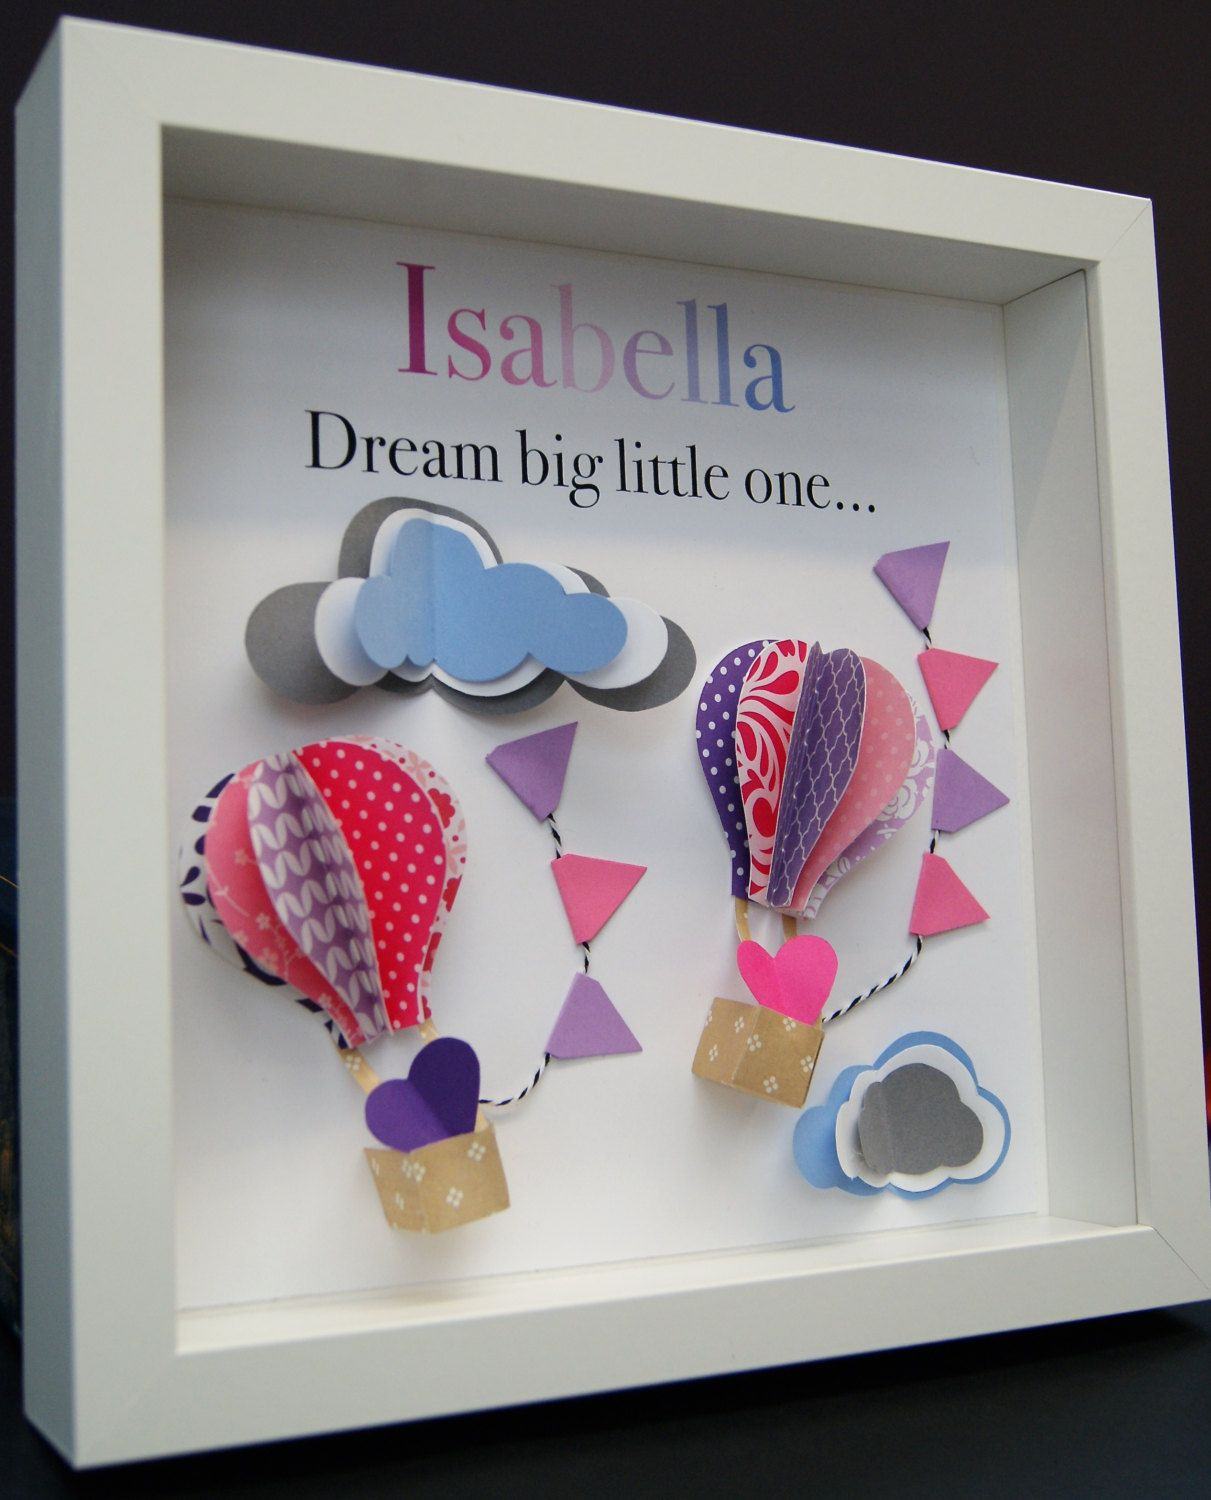 Personal Baby Shower Gift Ideas
 Baby Girl Frame with Hot Air Balloons Paper Art Baby